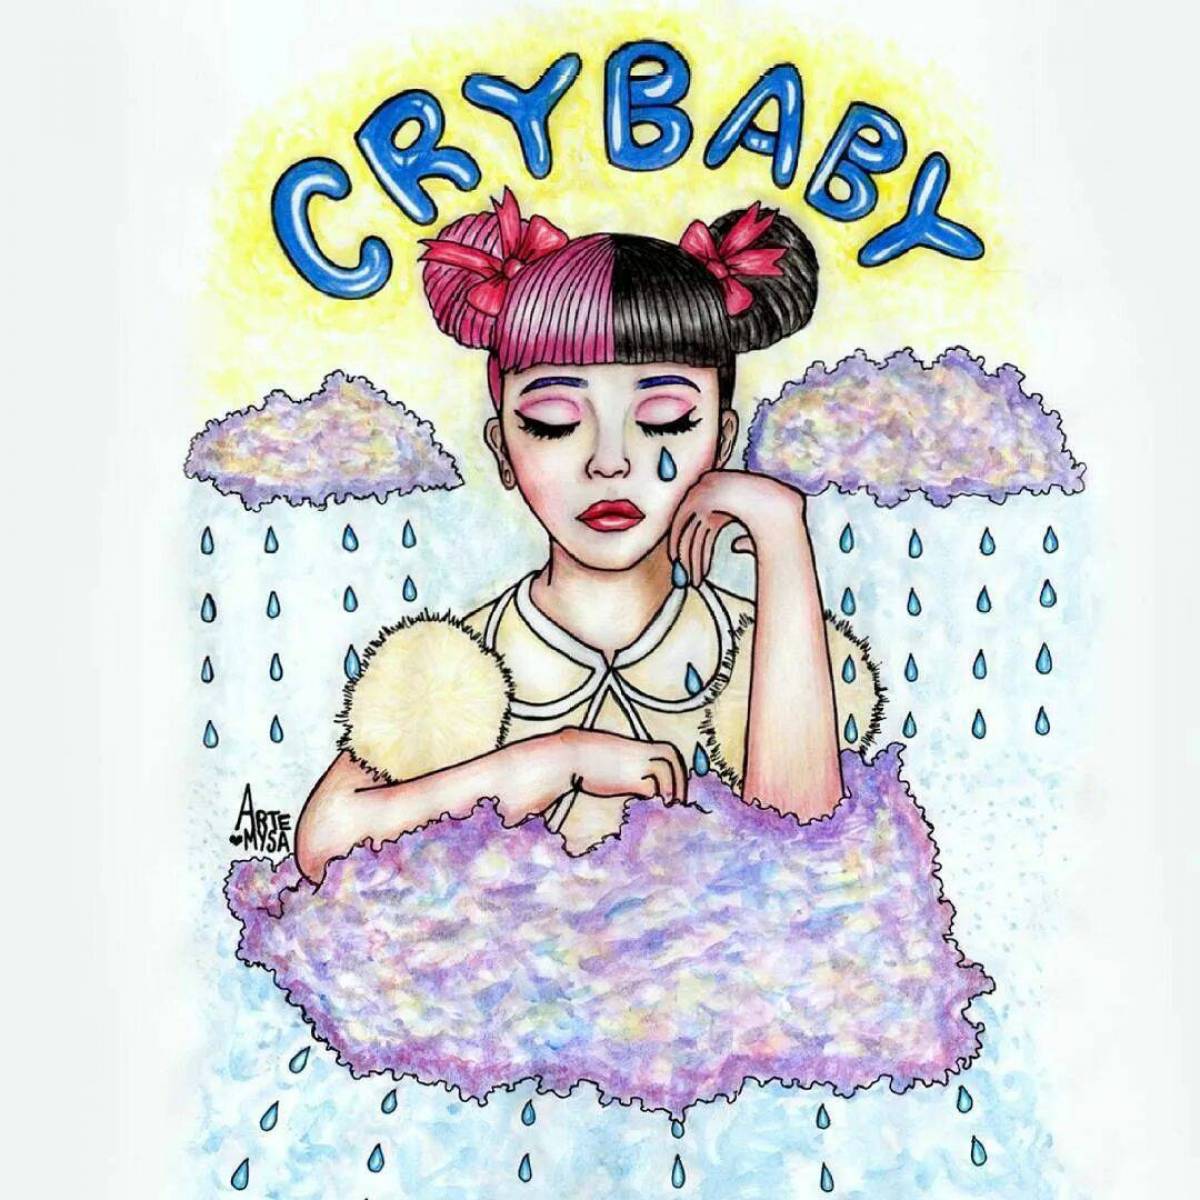 Crybaby #13